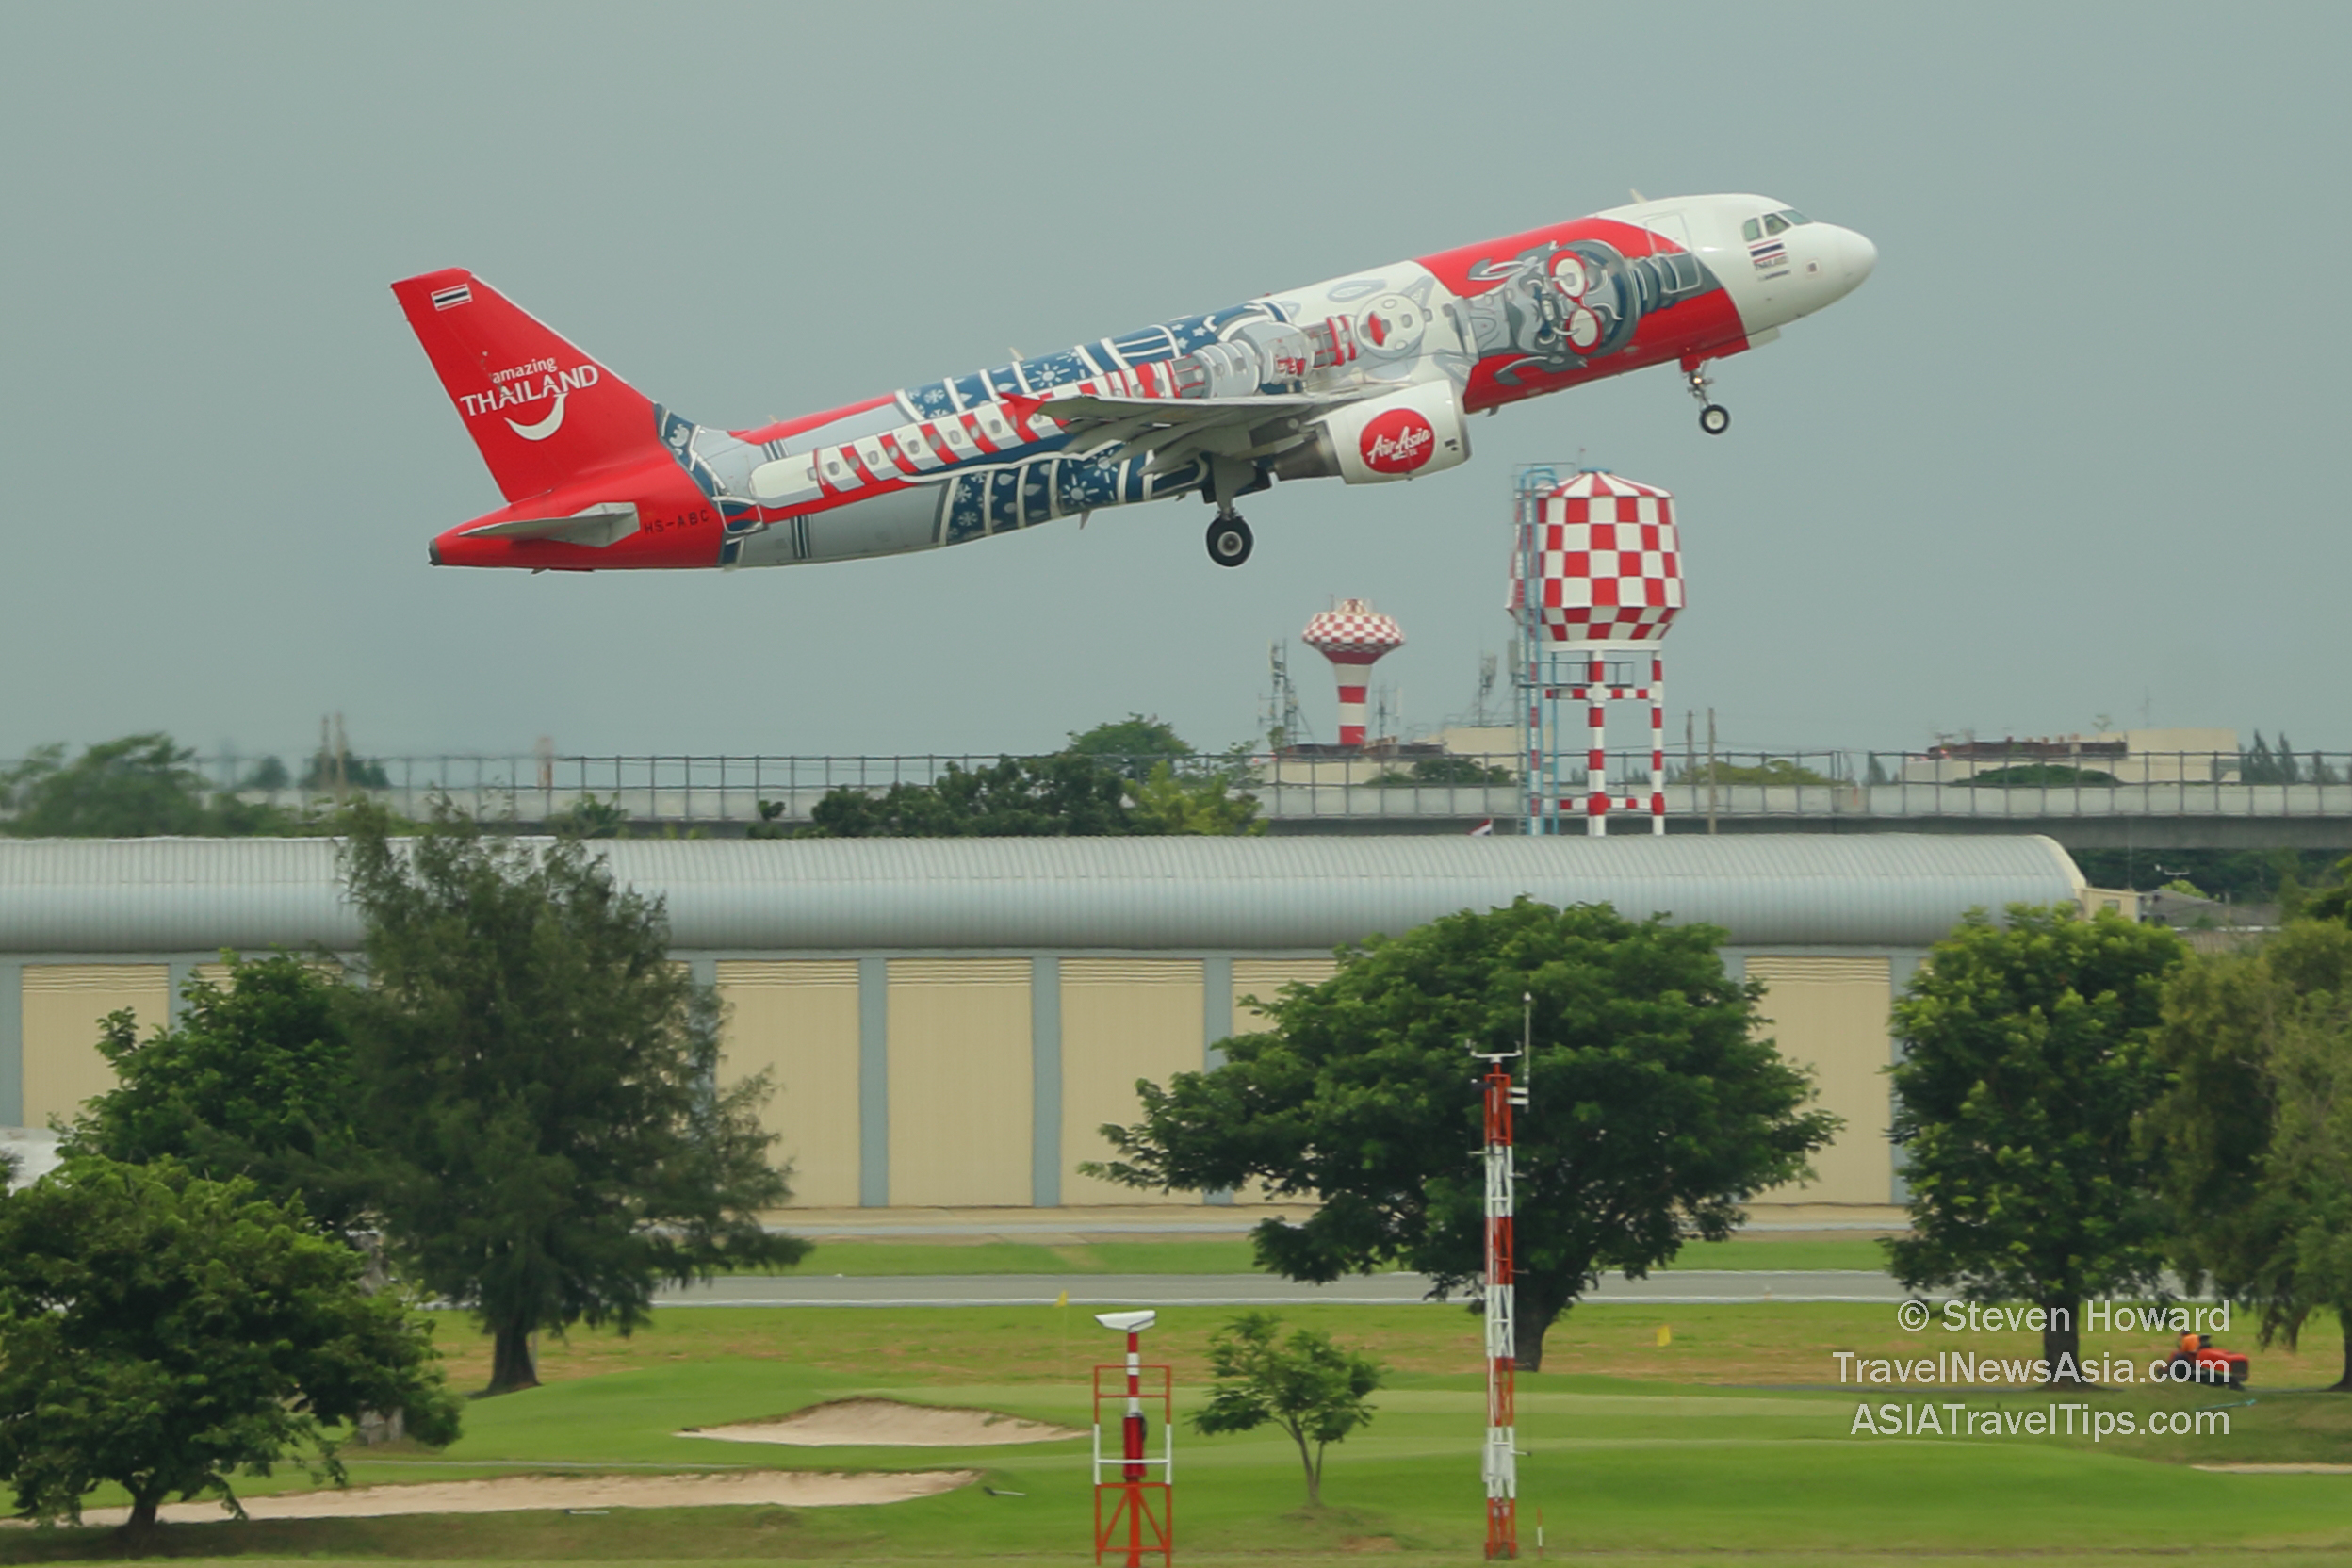 AirAsia Thailand Airbus A320 taking off from Don Mueang Airport in Bangkok. Picture by Steven Howard of TravelNewsAsia.com Click to enlarge.